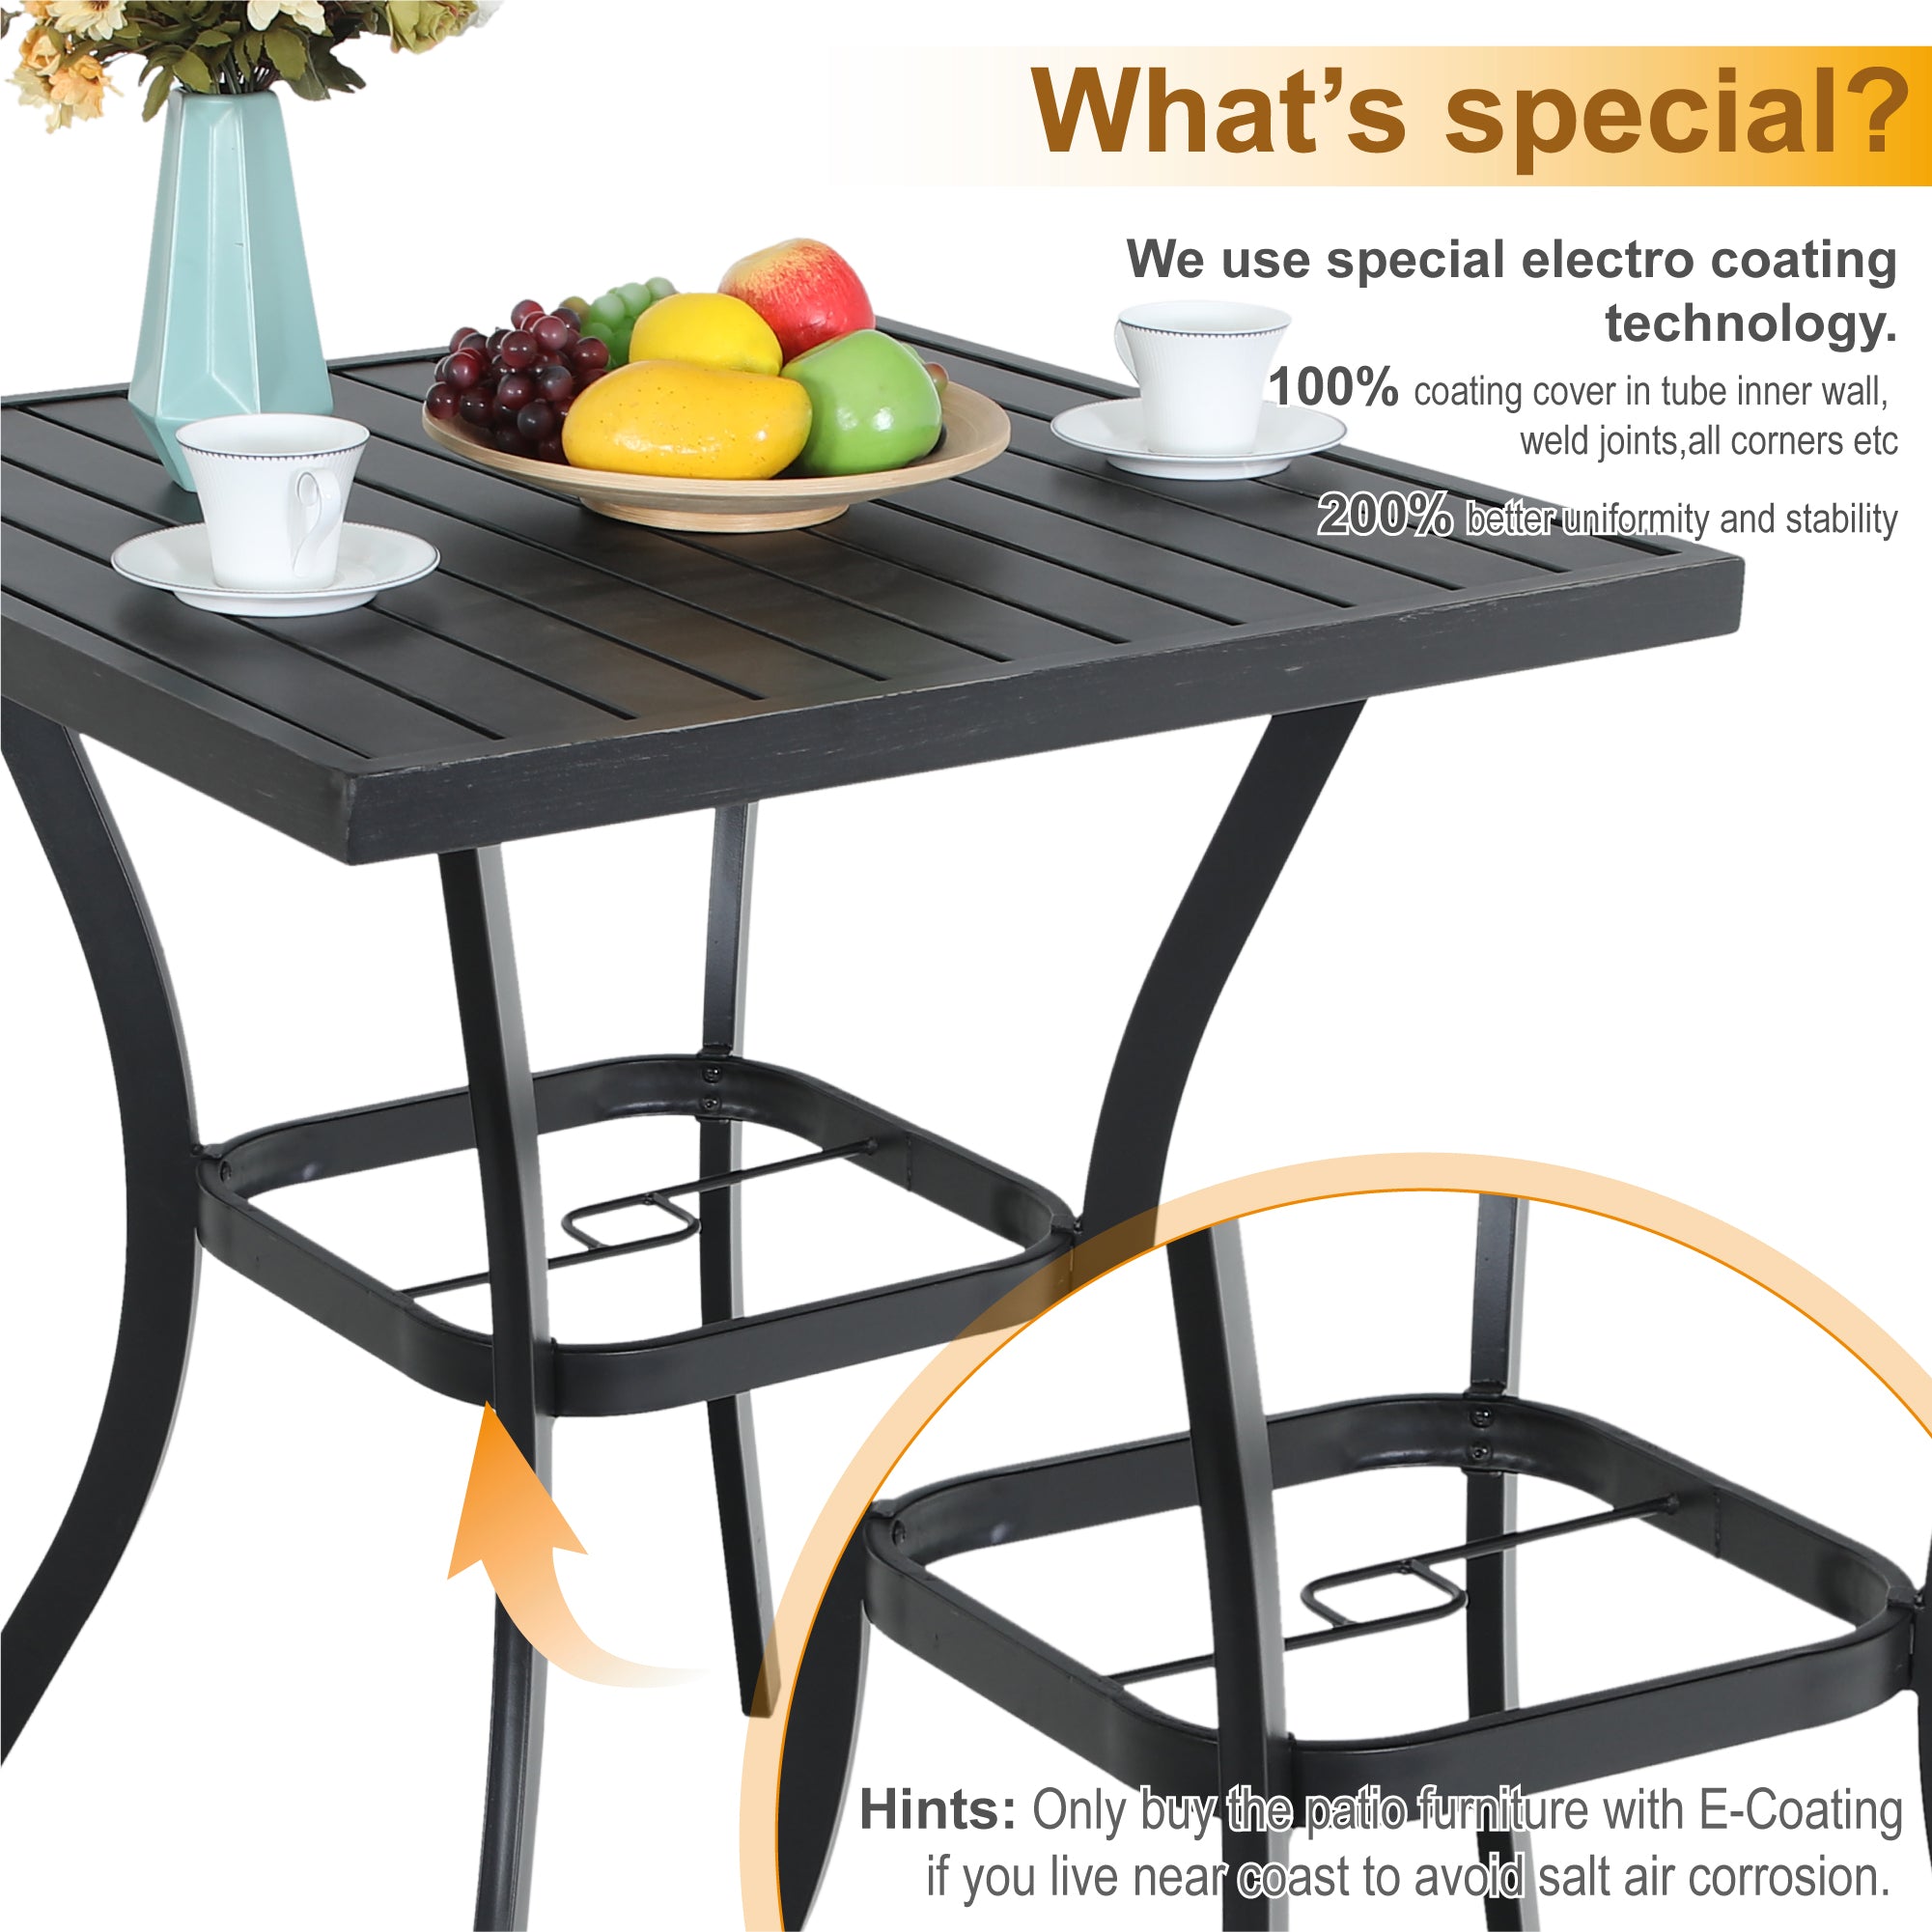 Sophia & William Outdoor Bar Stool Sets Swivel Textilene Bar Stools with Reinforced Base & Square High Bar Table